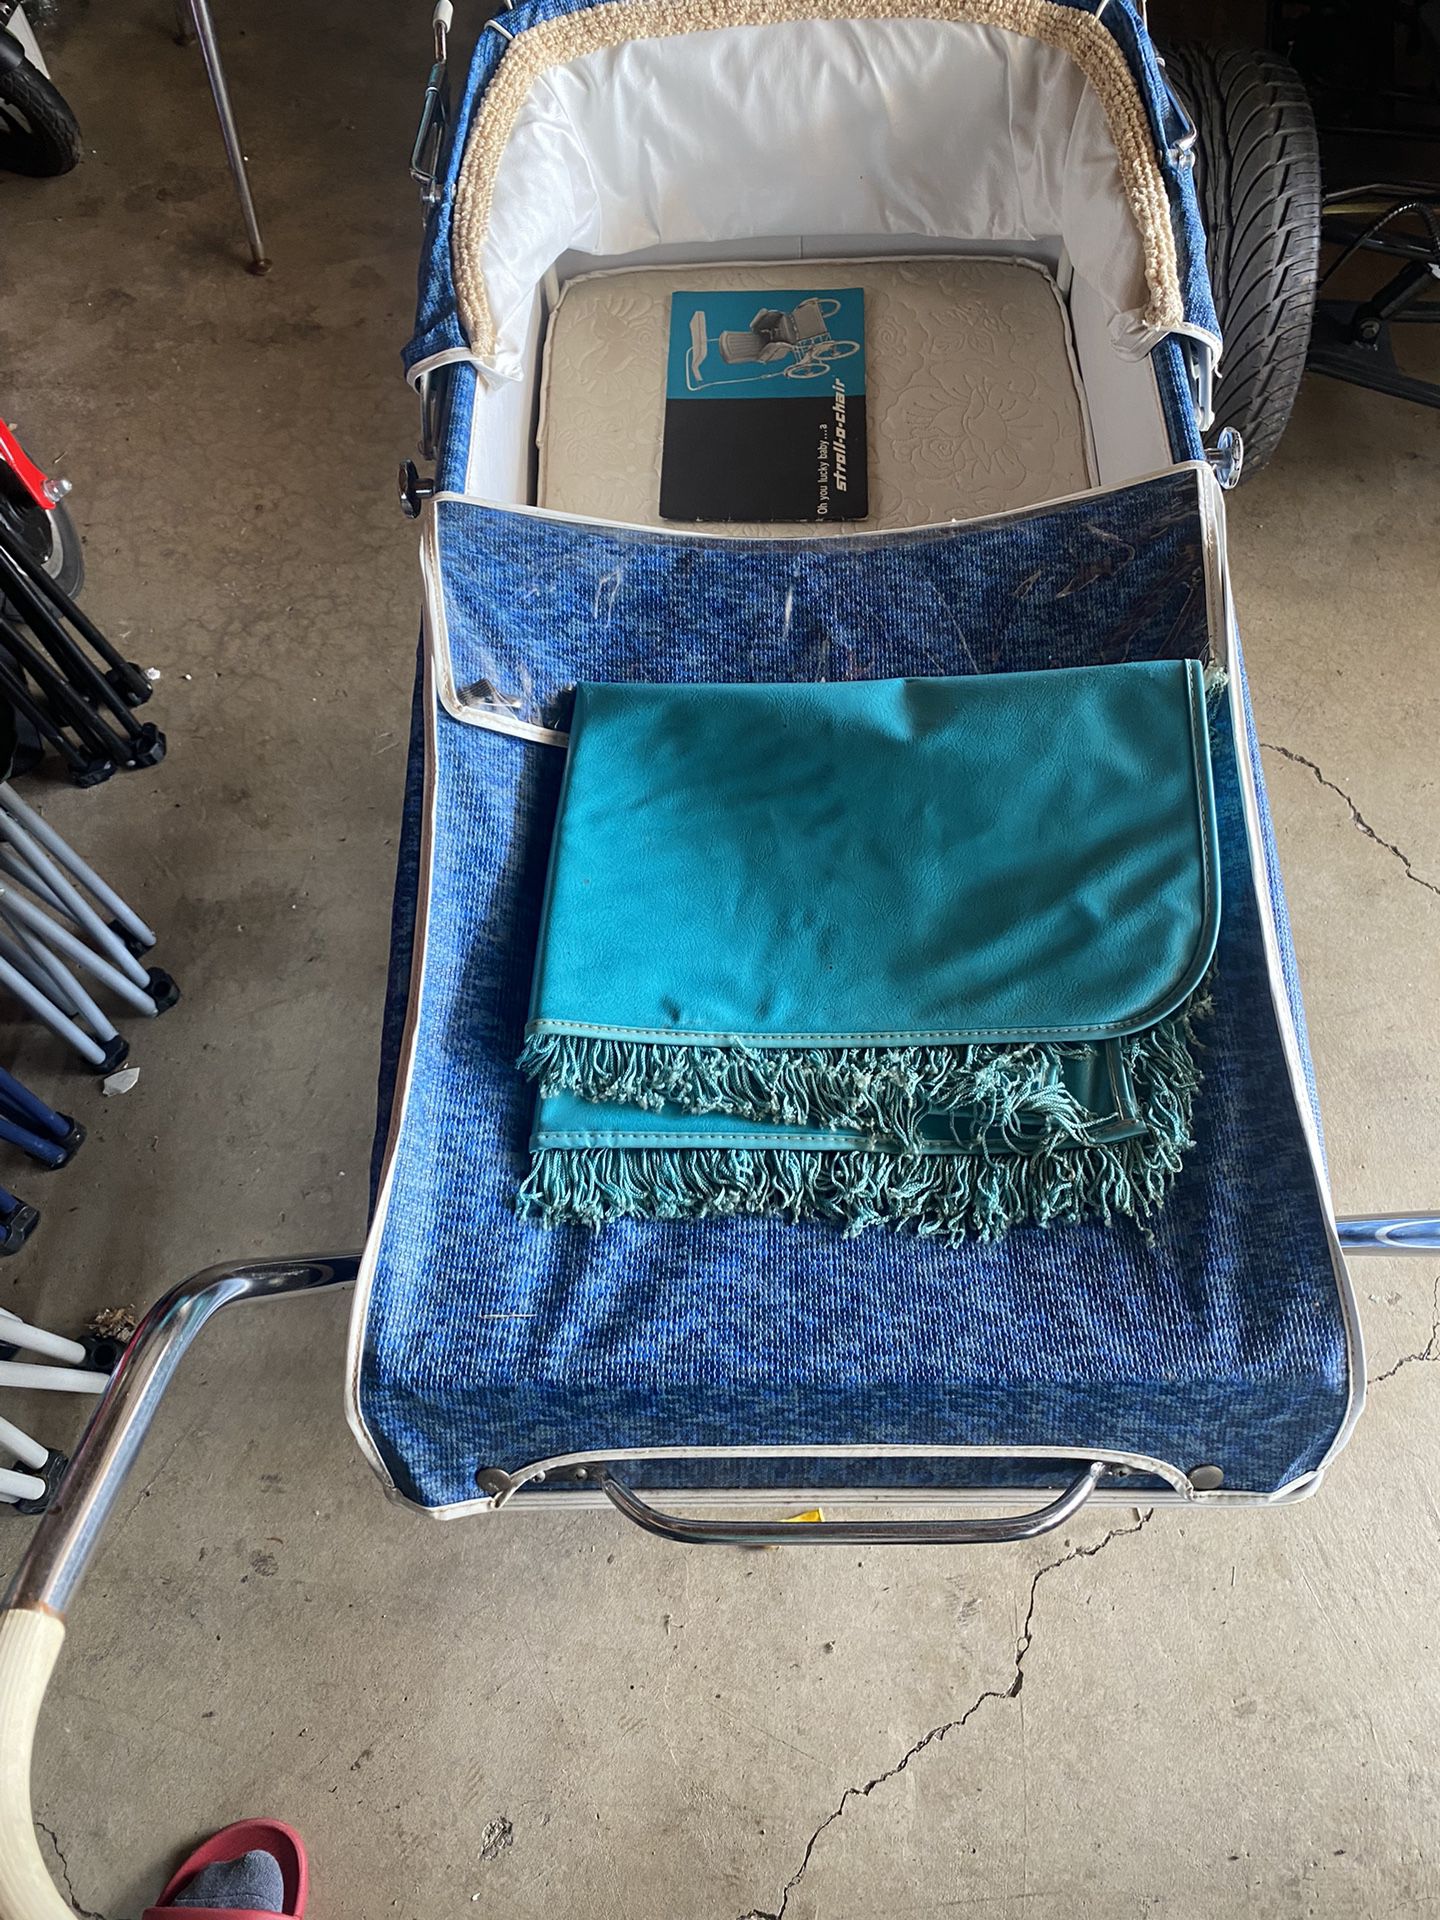 Antique Stroller With High Chair And Seat